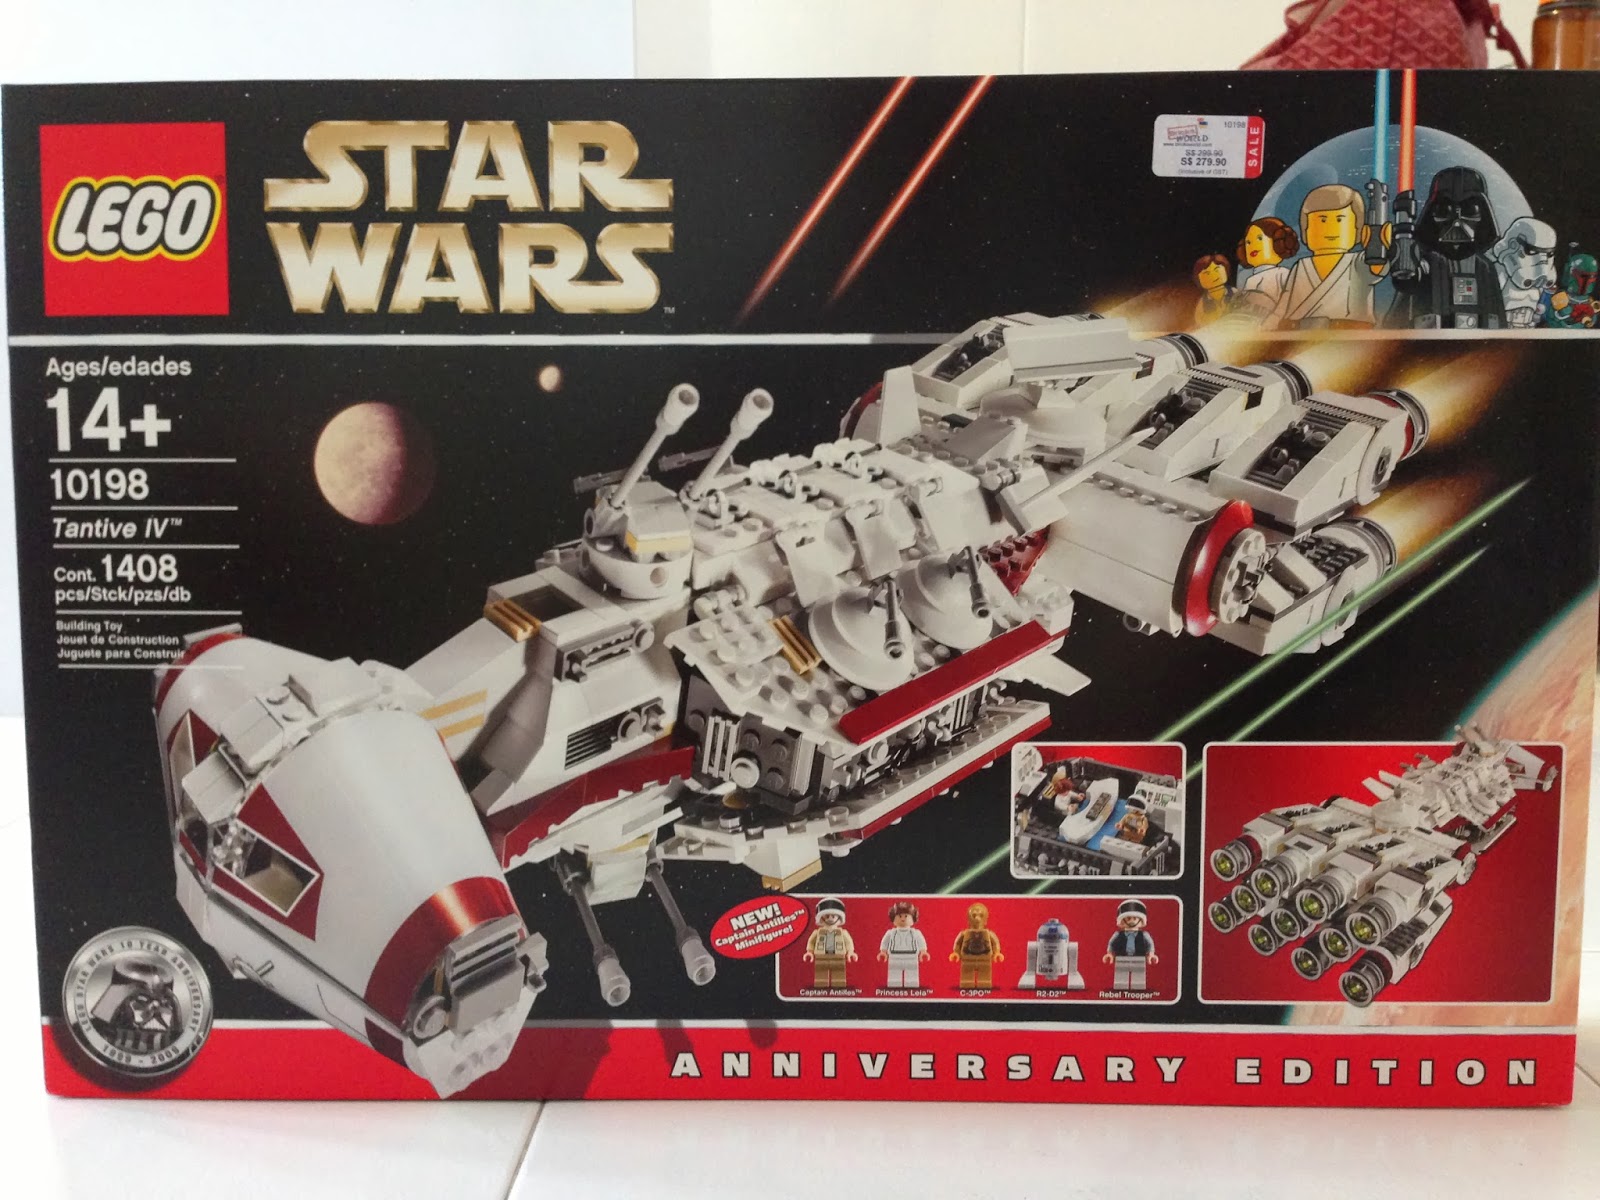 fordrejer Lang Kiks The Marriage of LEGO and Star Wars: Review: 10198 Tantive IV